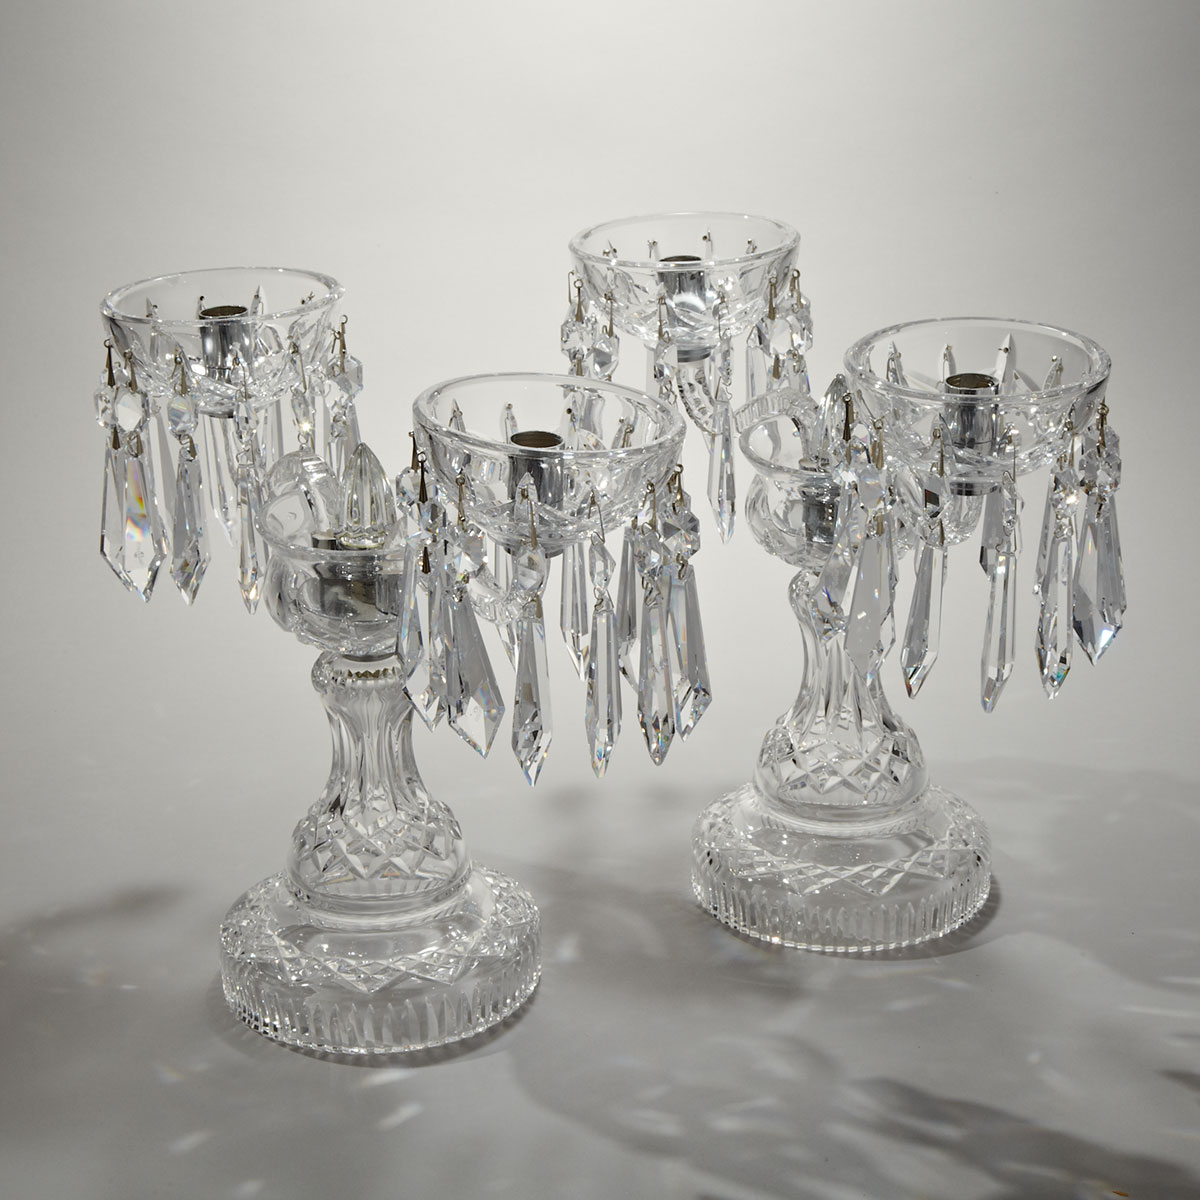 Pair of Waterford Cut Glass Two-Light Candelabra, 20th century